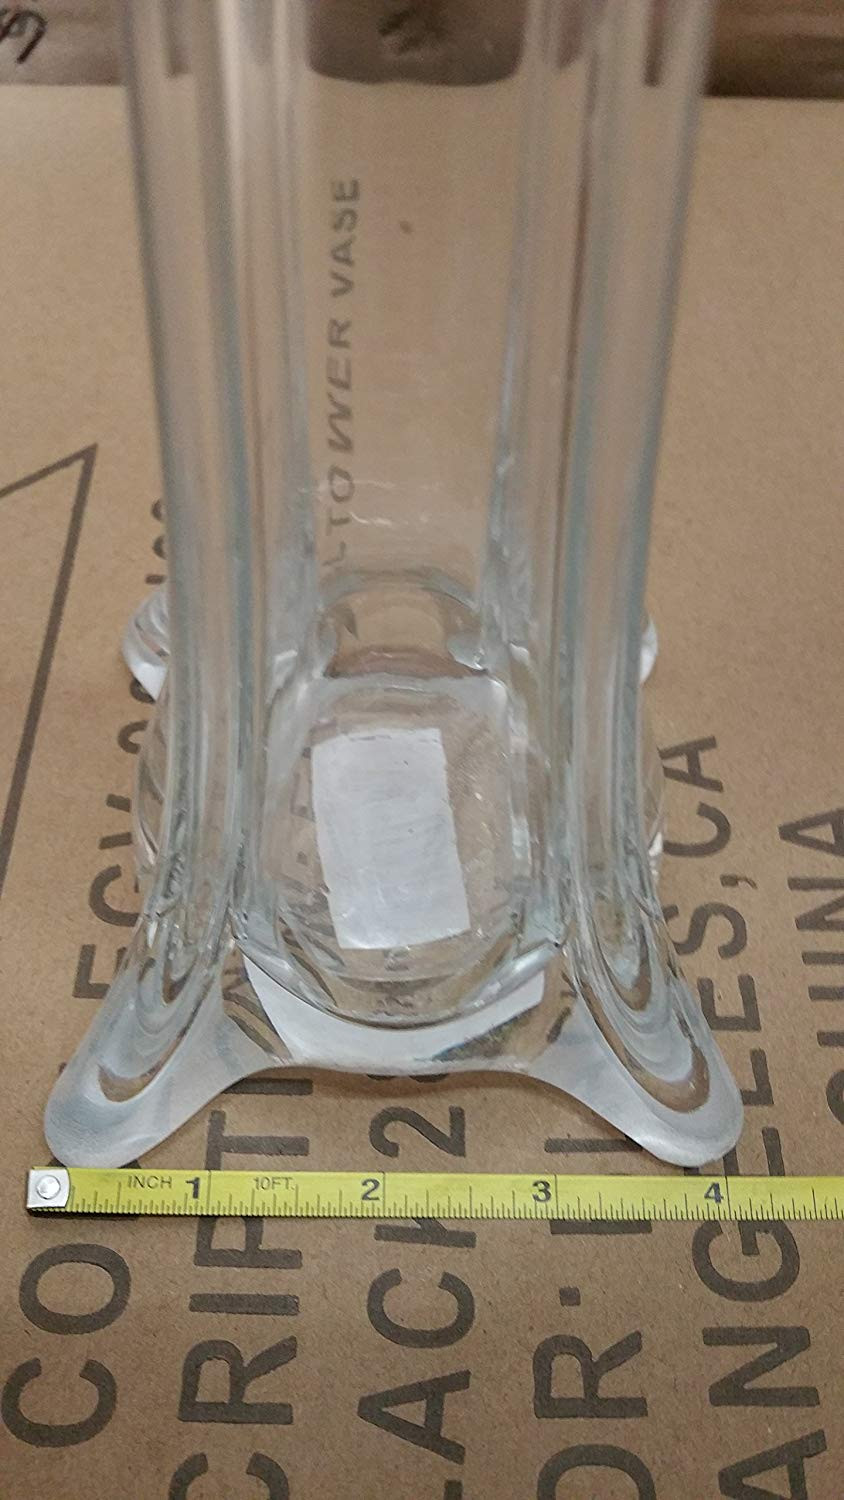 22 Popular Clear Plastic Vases for Weddings 2022 free download clear plastic vases for weddings of amazon com eiffel tower vase 32 inch case of 12 by la crafts for amazon com eiffel tower vase 32 inch case of 12 by la crafts clear arts crafts sewing